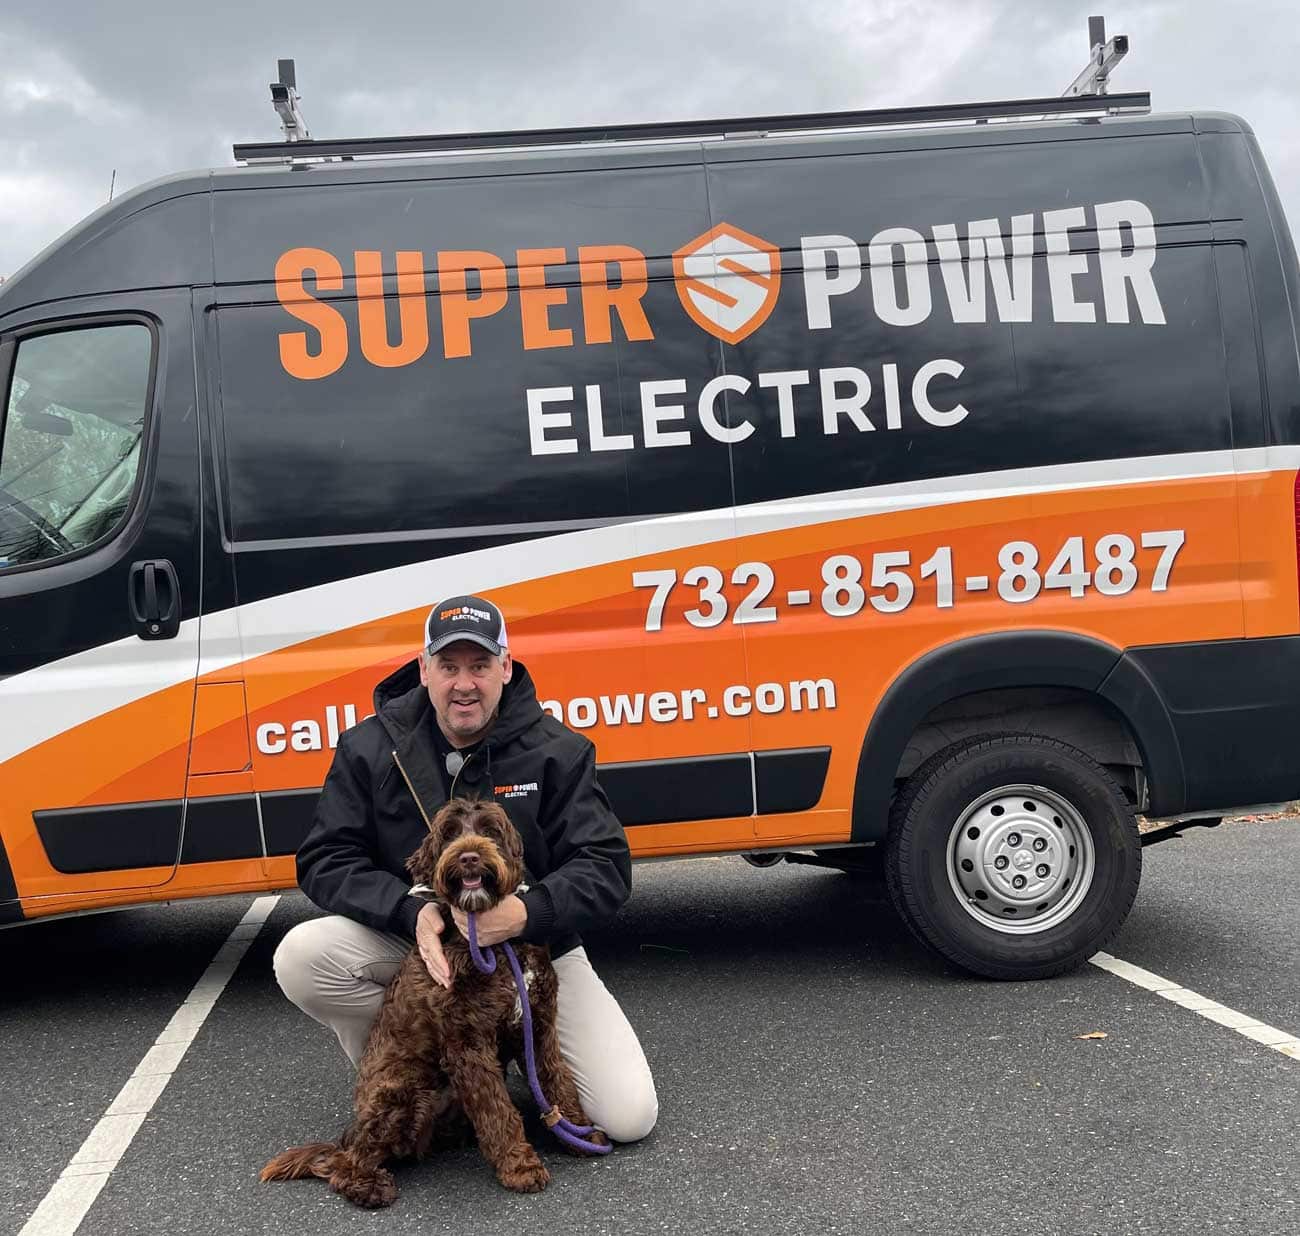 Super Power Electric - Red Bank, NJ, US, best electricians near me